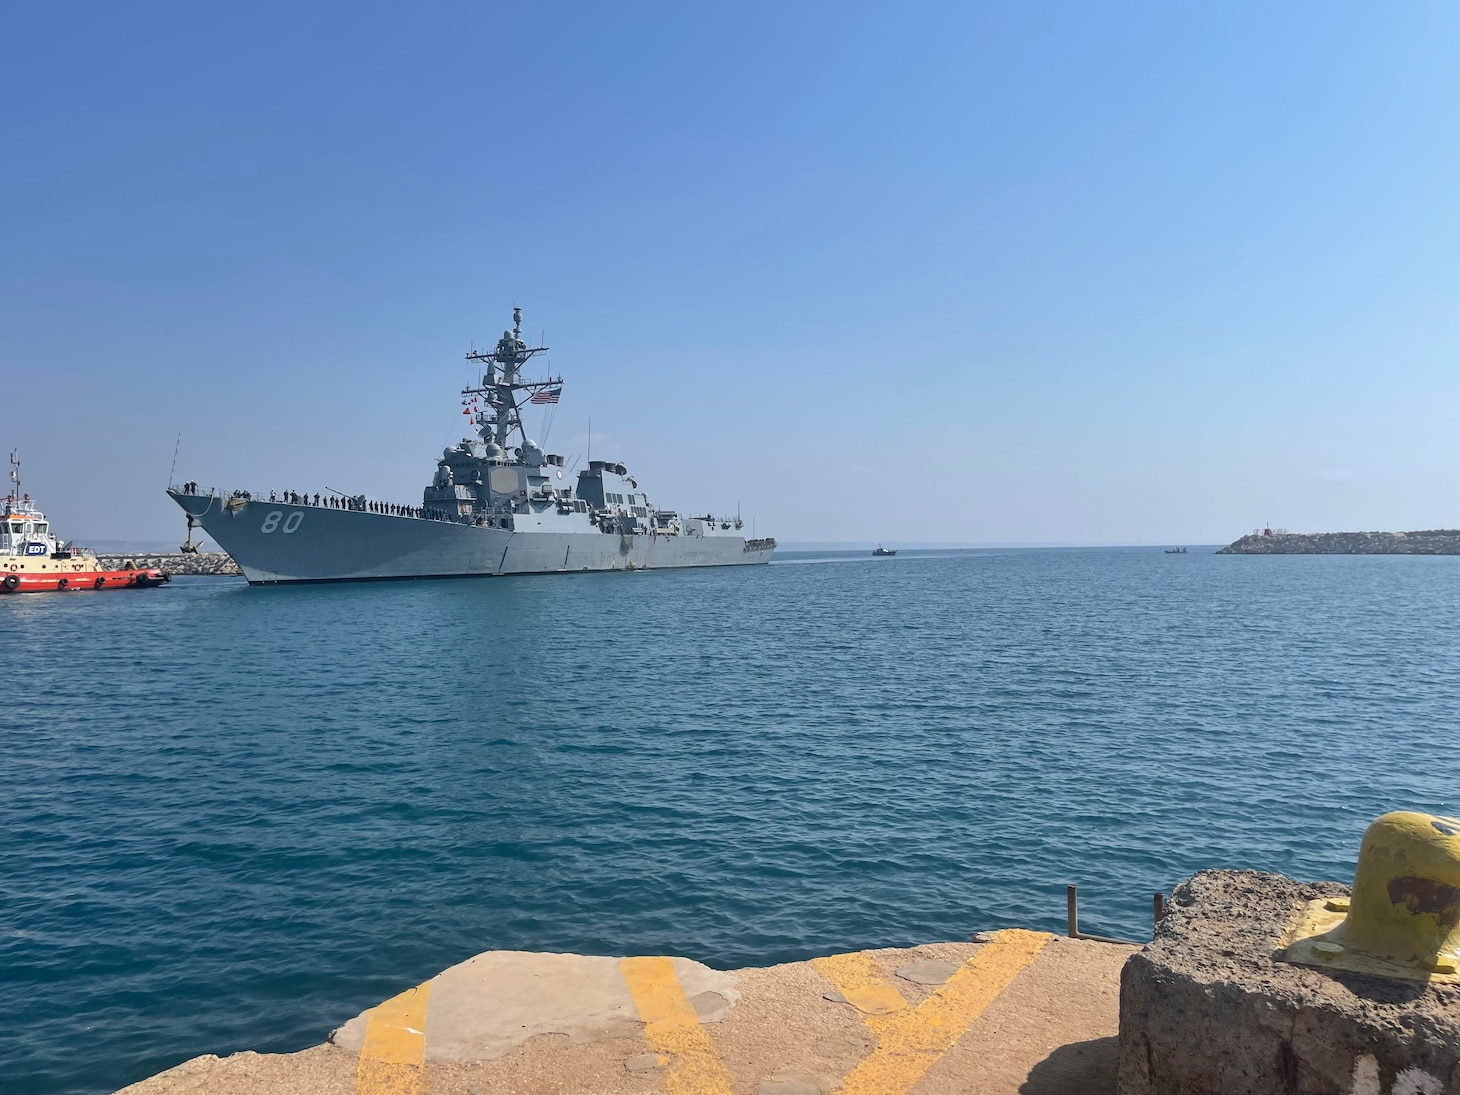 The Arleigh Burke-class guided-missile destroyer USS Roosevelt (DDG 80) arrives in Larnaca, Cyprus for a scheduled port visit. Roosevelt is on a scheduled deployment in the U.S. Naval Forces Europe area of operations, employed by the U.S. Sixth Fleet to defend U.S., allied and partner interests.(U.S. Embassy Cyprus courtesy photo)